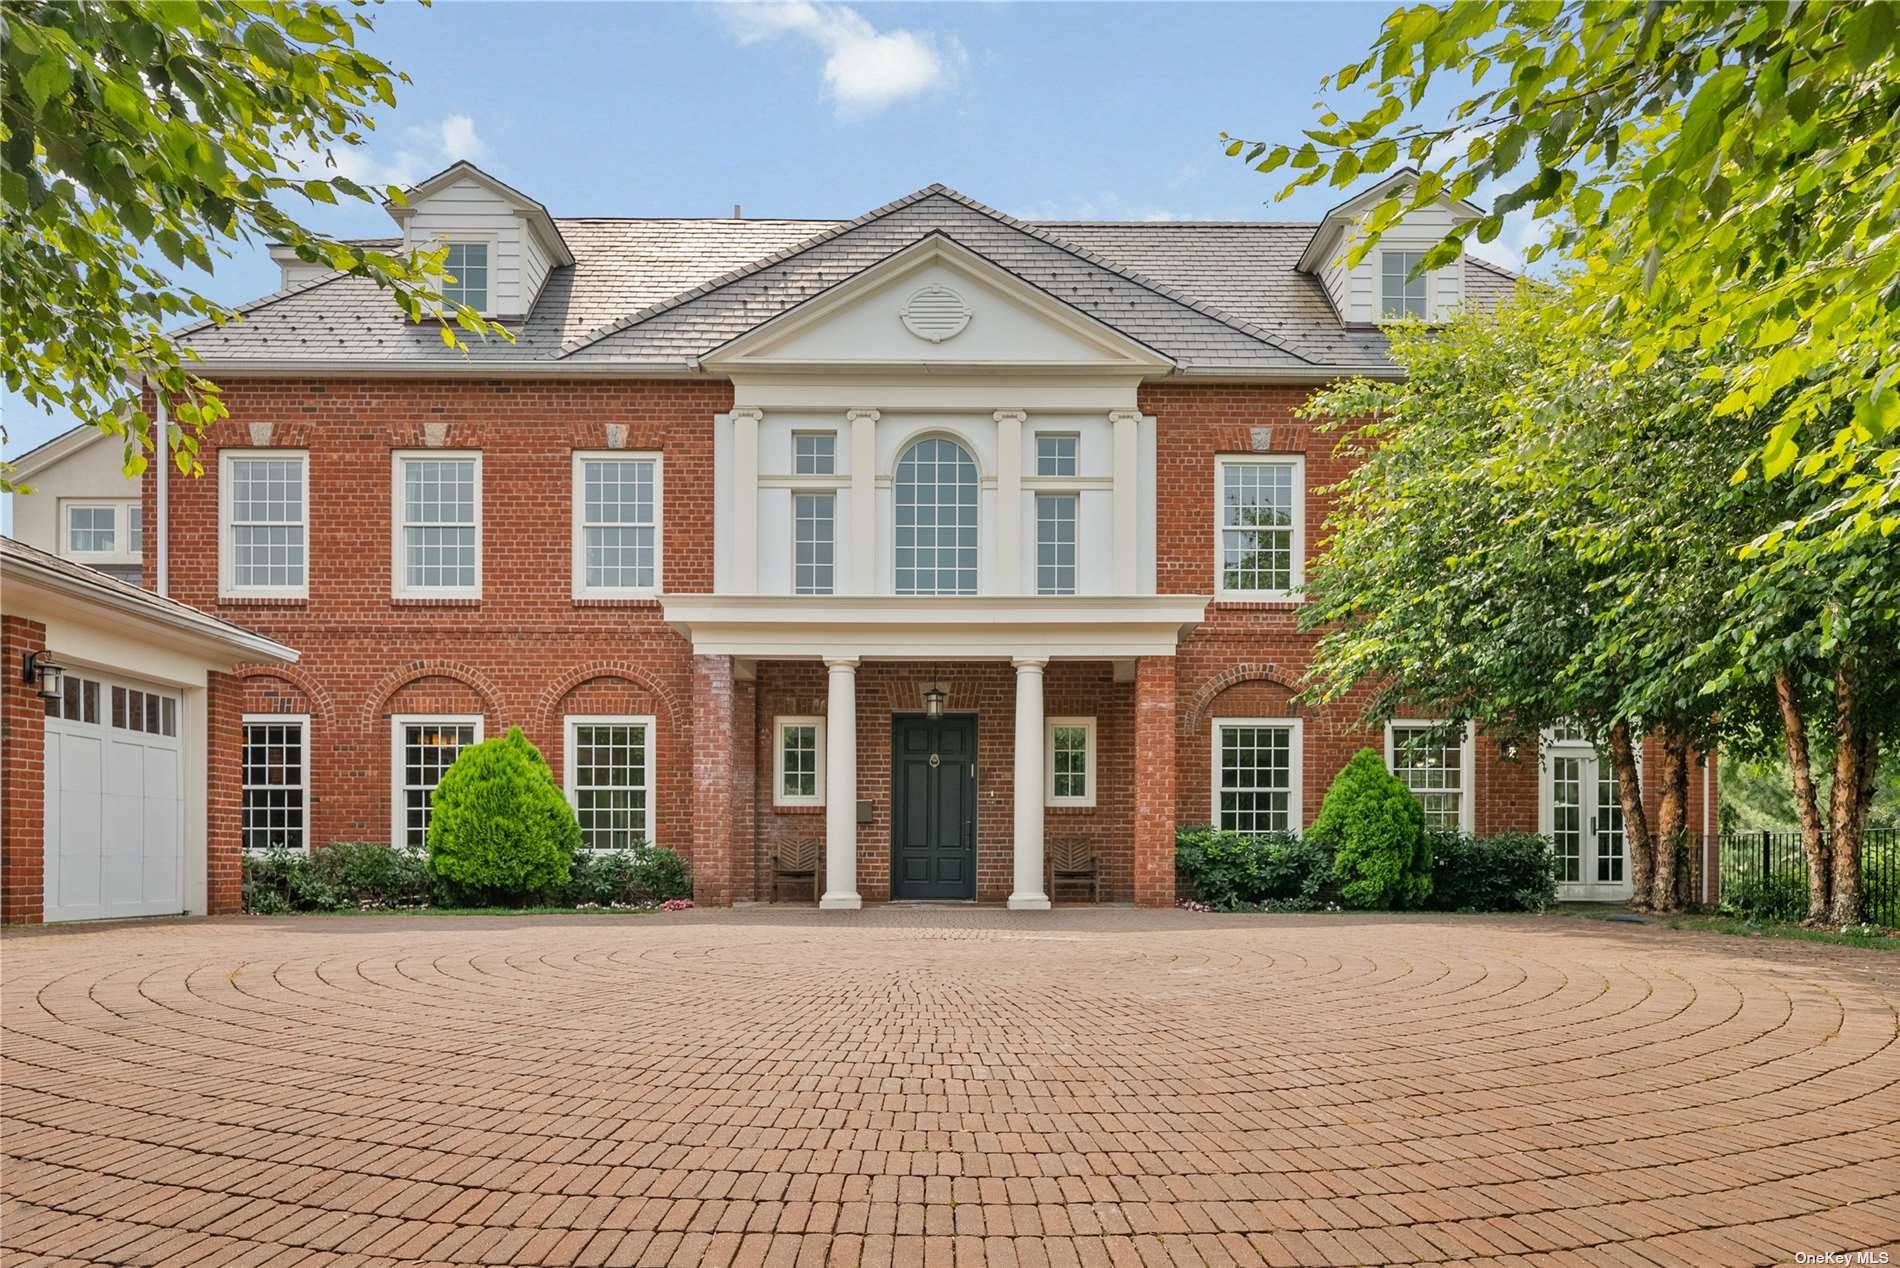 Welcome to 5020 Grosvenor, an exquisite neo Georgian masterpiece reminiscent of the grand estate homes that graced the early decades of the twentieth century.